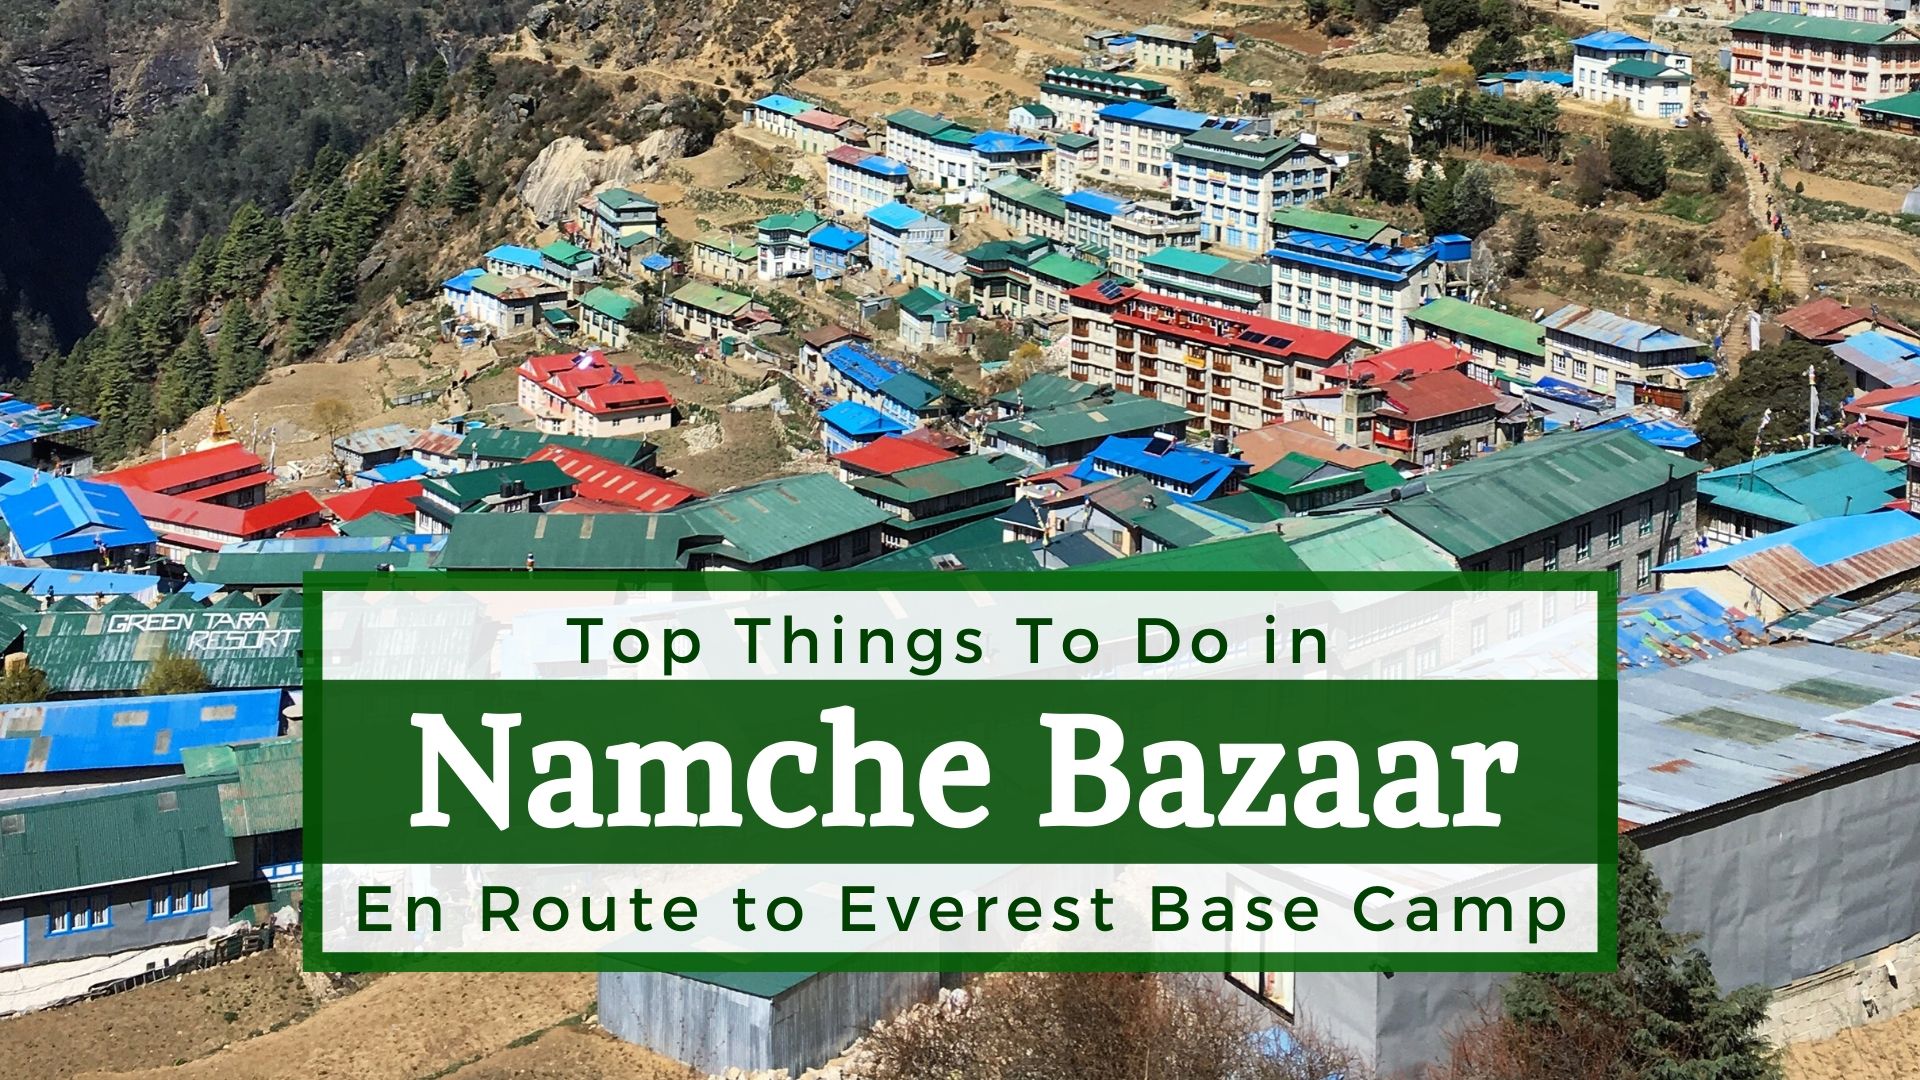 Best Things To Do In Namche Bazaar, Nepal